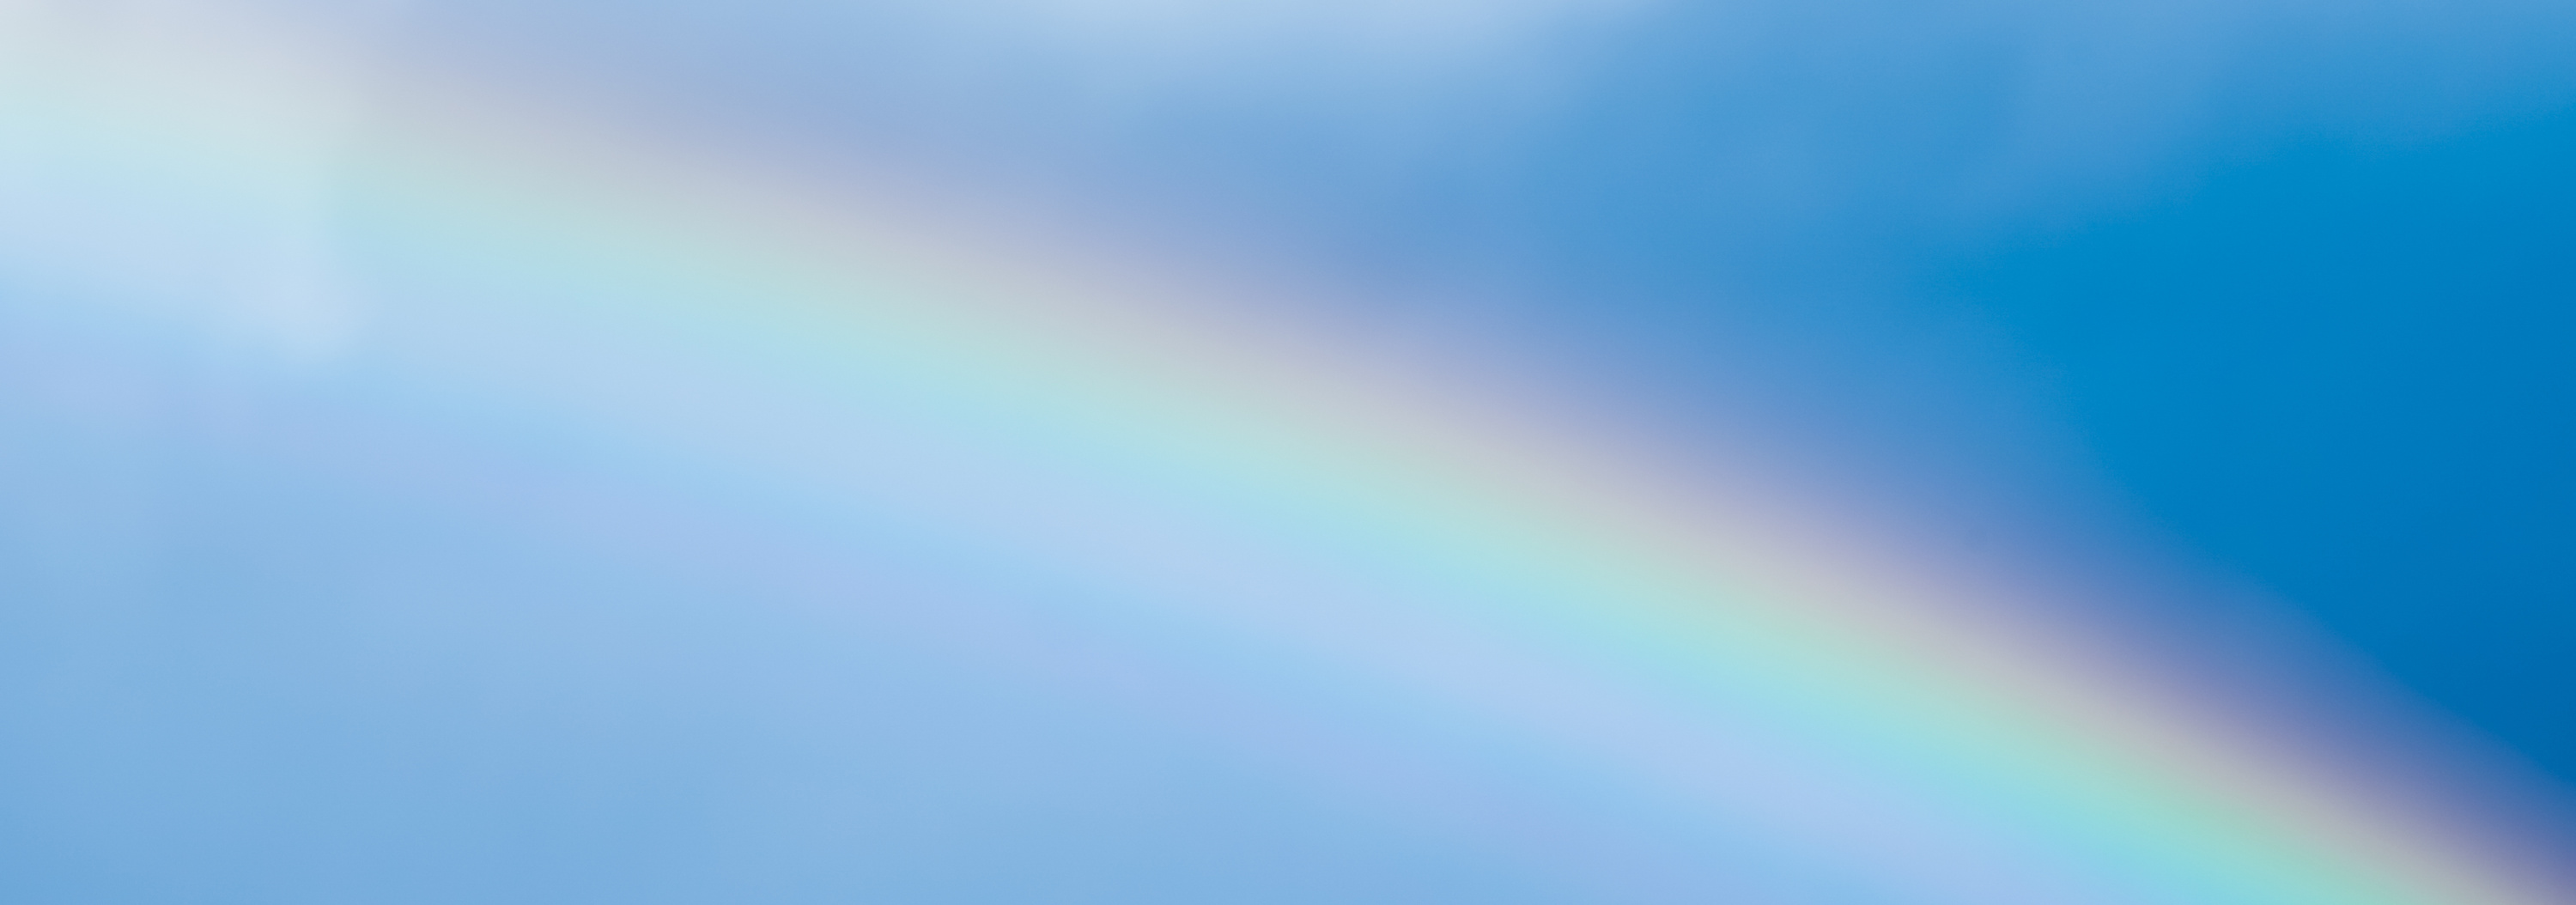 Rainbow in a Dreamy Blue Sky, Spiritual and Nature Background